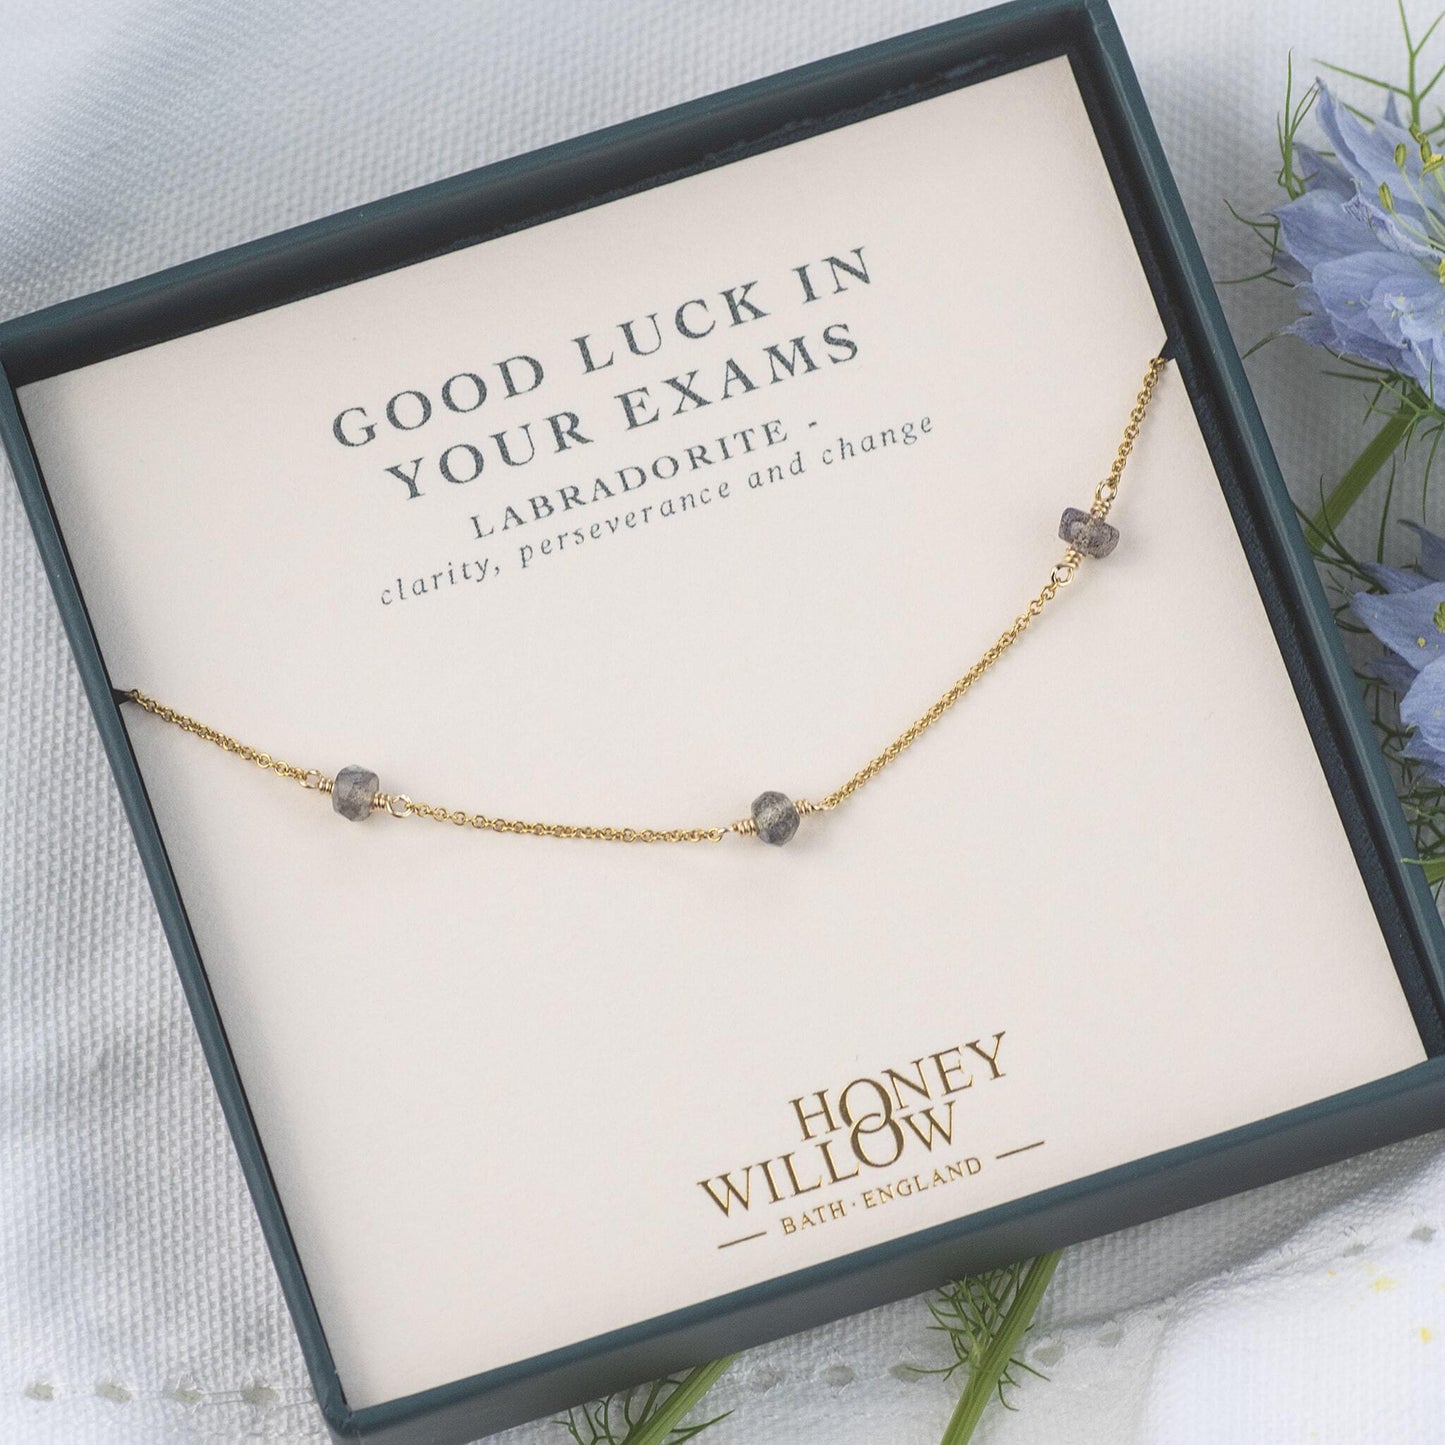 Good Luck in Exams Gift - Labradorite Satellite Necklace - Clarity, Perseverance & Change